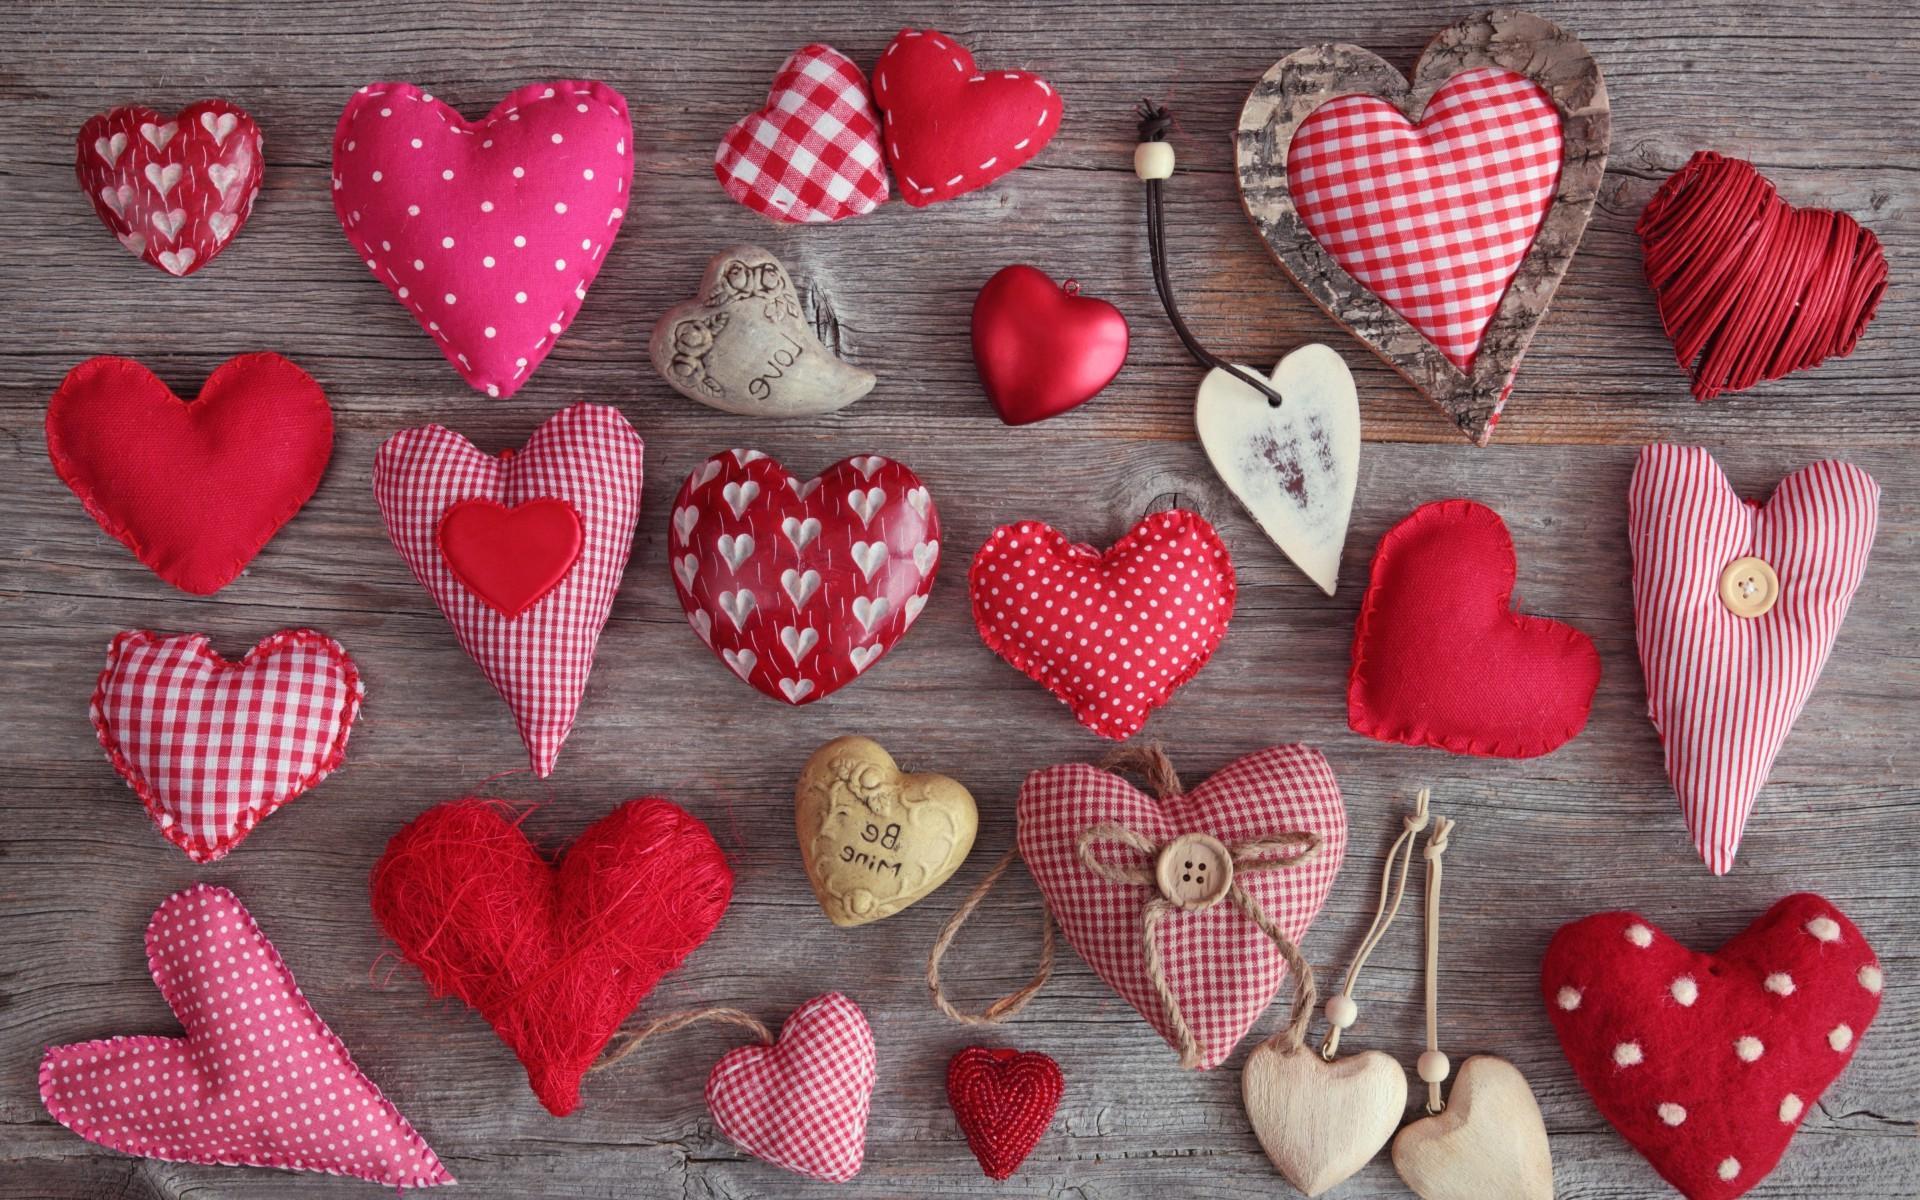 Love & Romantic Wallpapers : Backgrounds and pictures of valentine heart,  flowers and polka dots as home & lock screen images by Sooppi Moossa Kutty